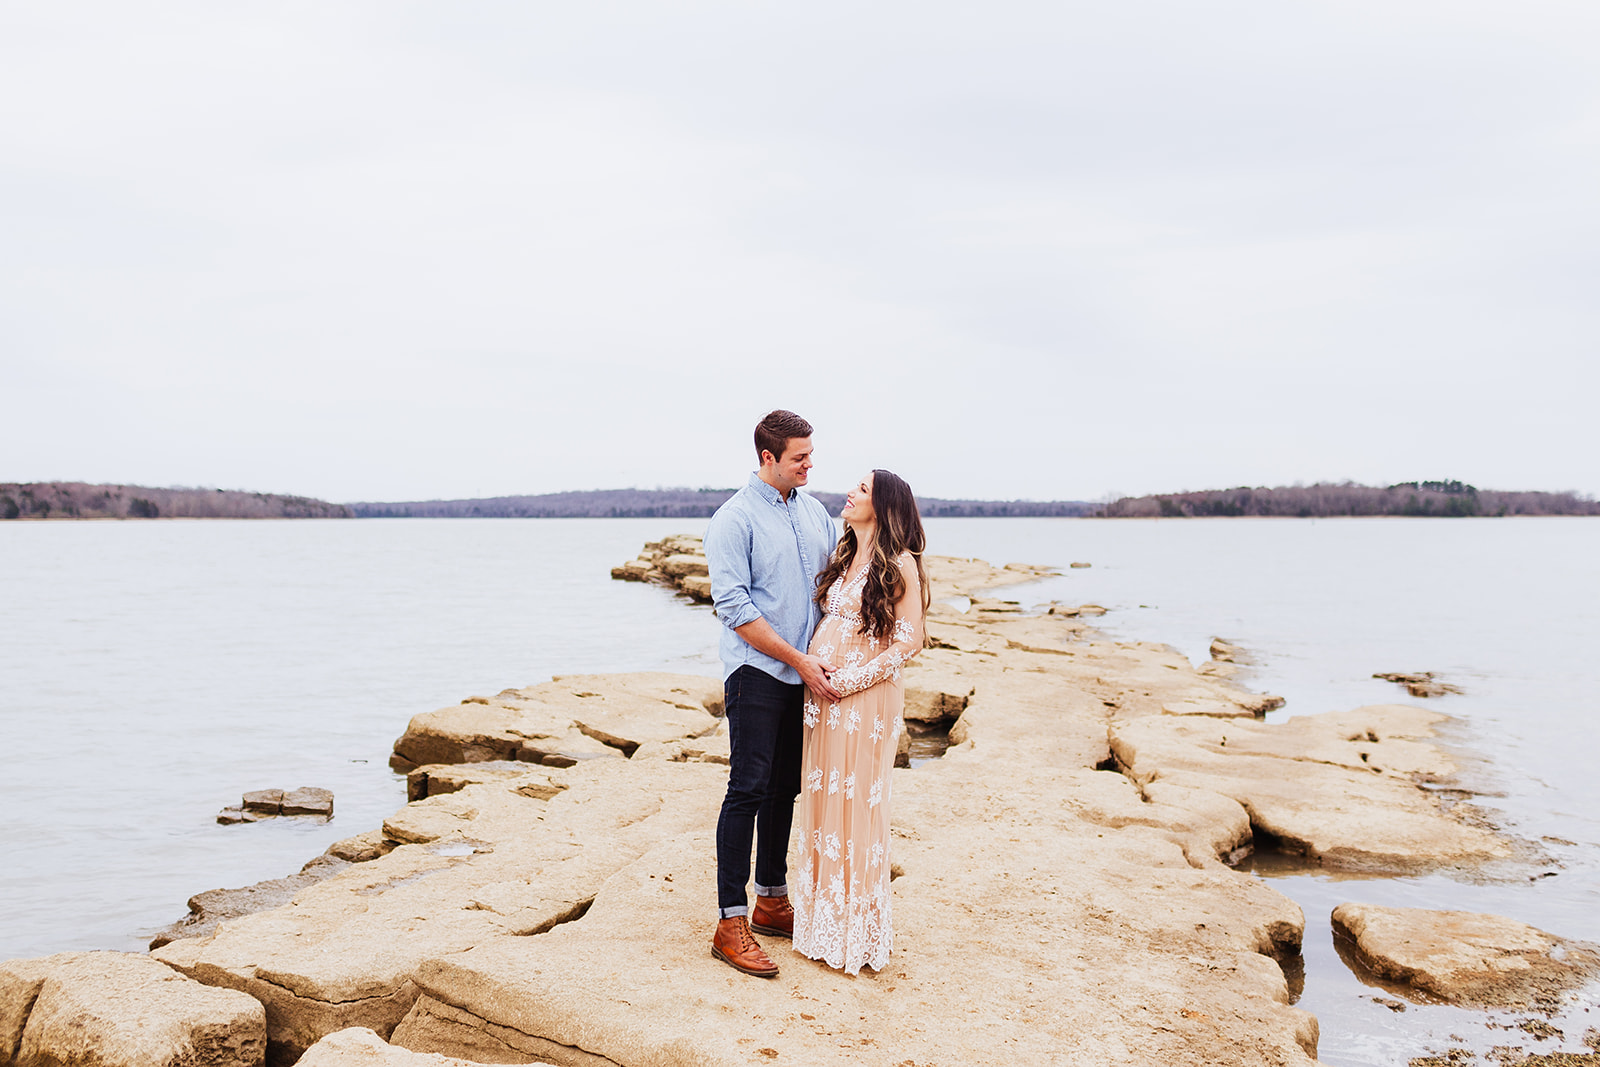 Shoreline Maternity Session from Emily Green Creative